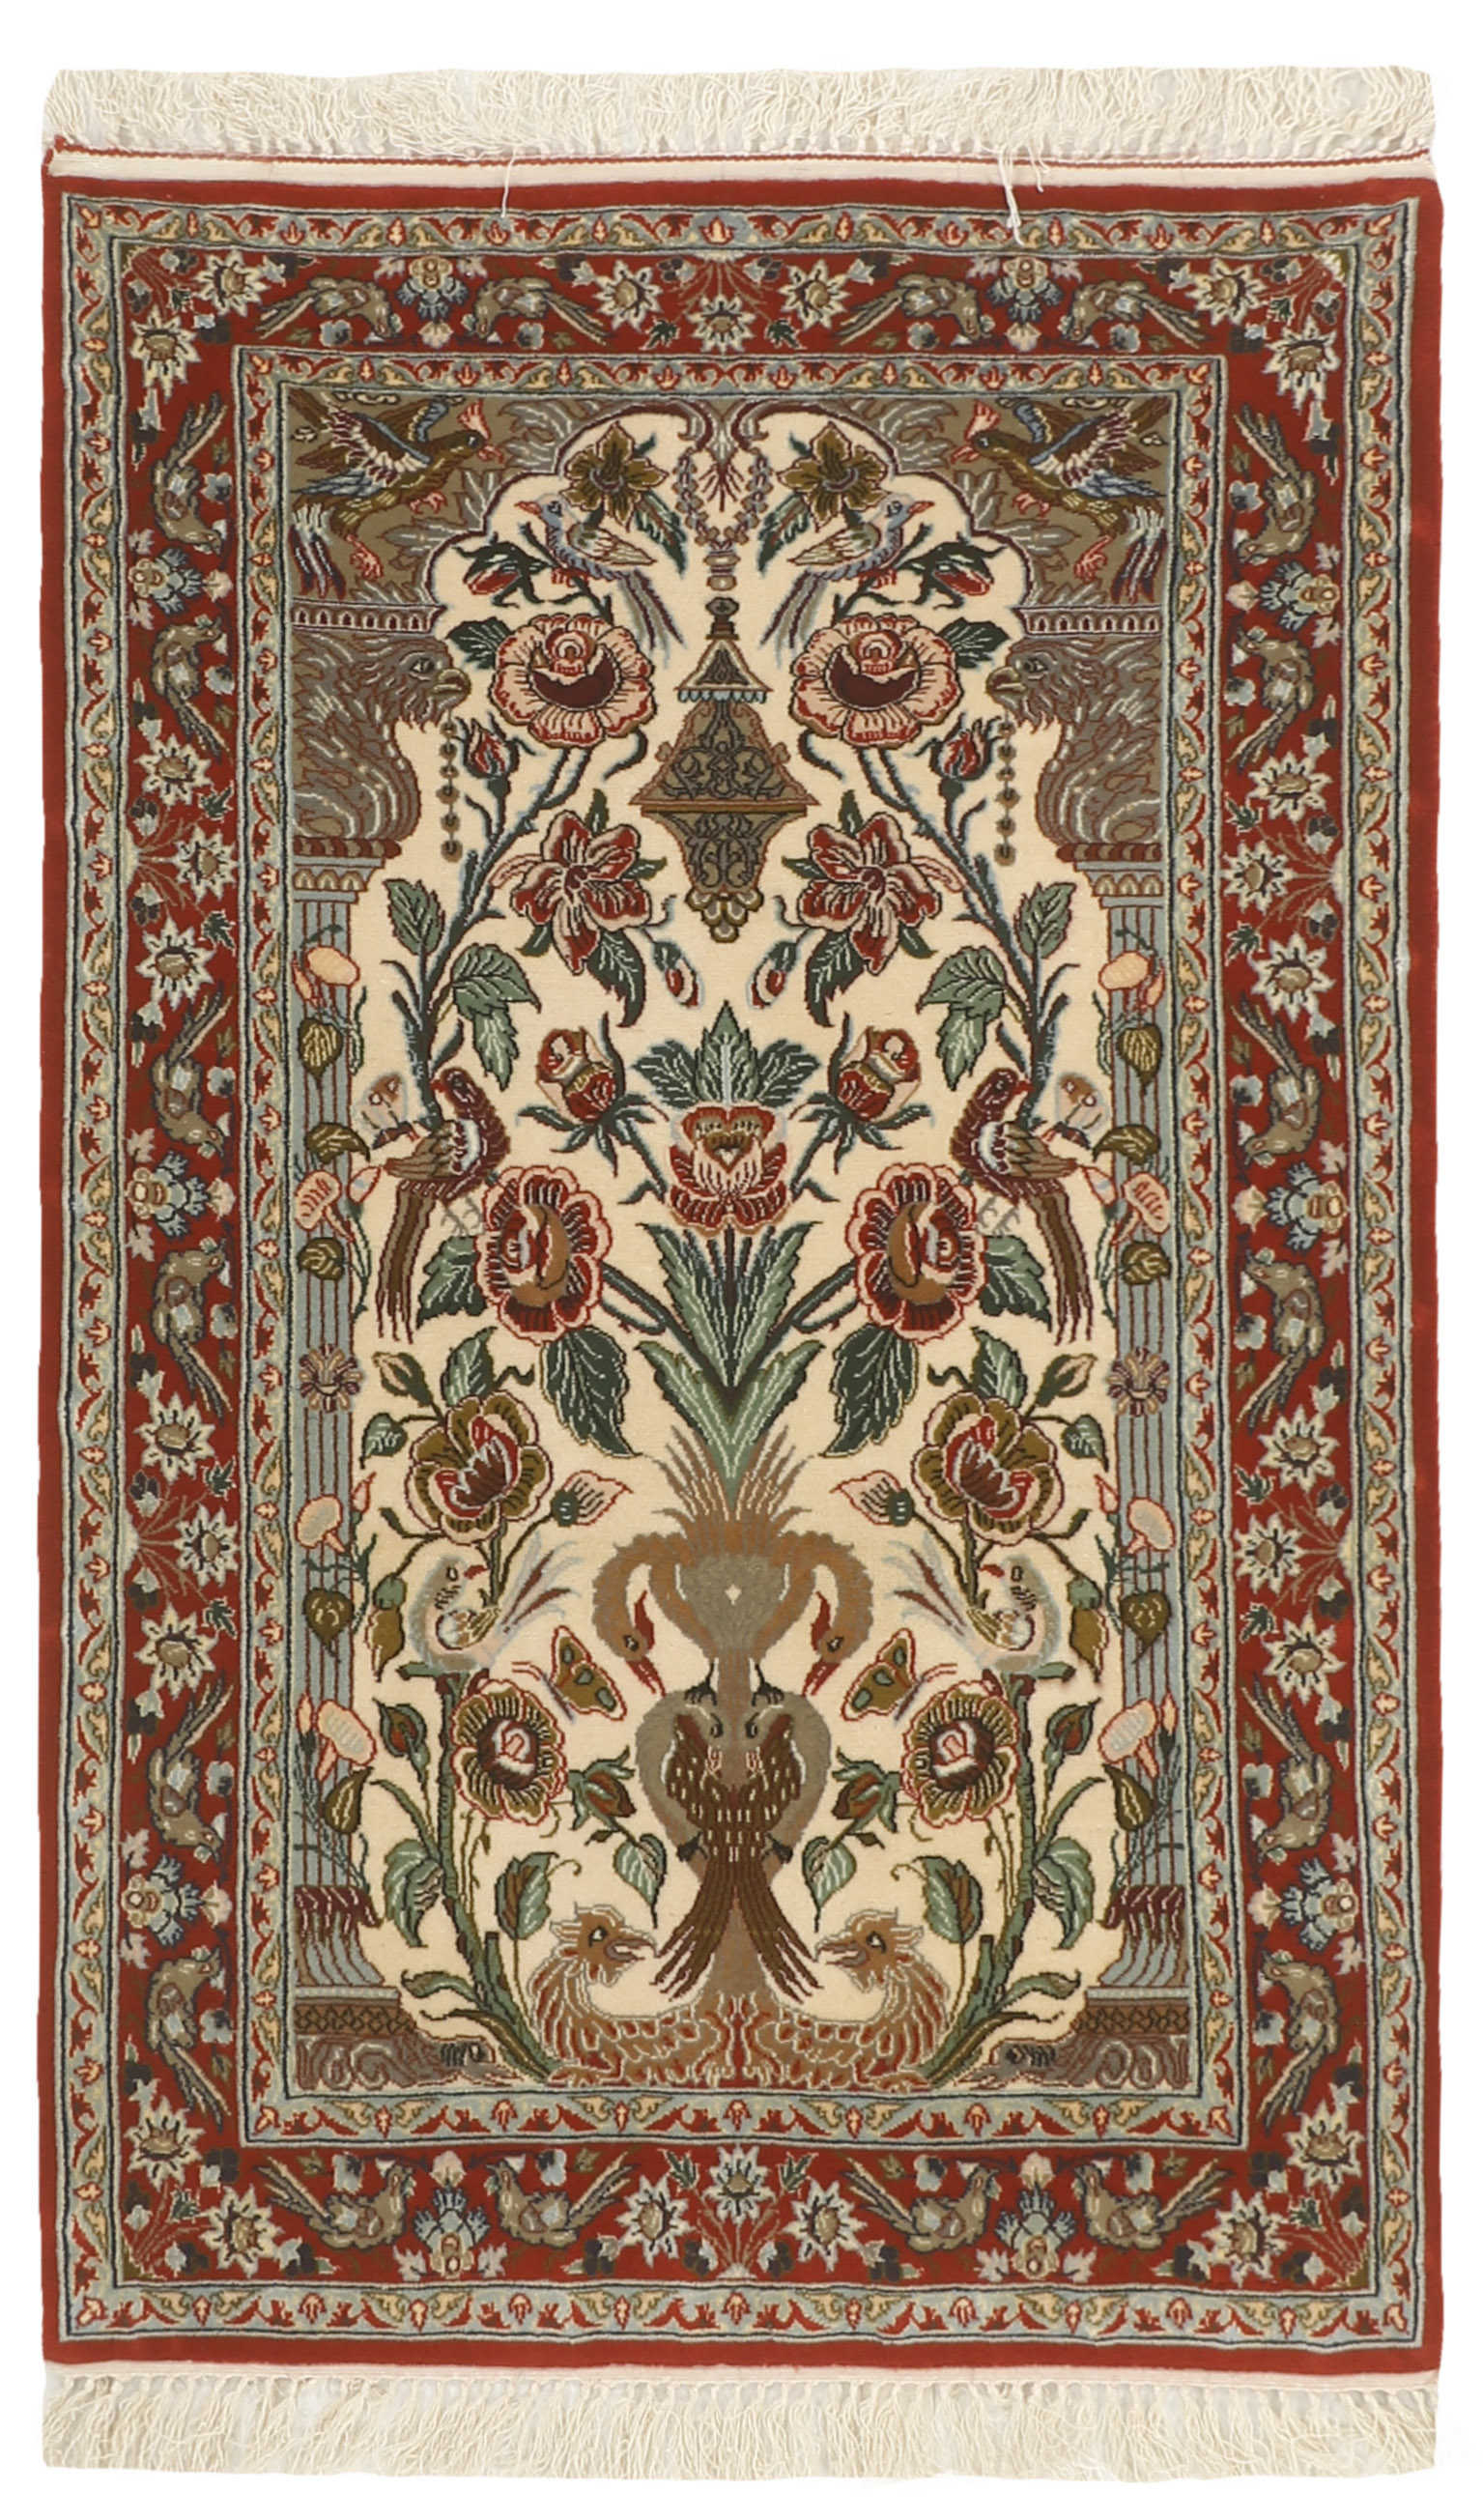 Authentic persian rug with traditional pattern in red, blue and ivory